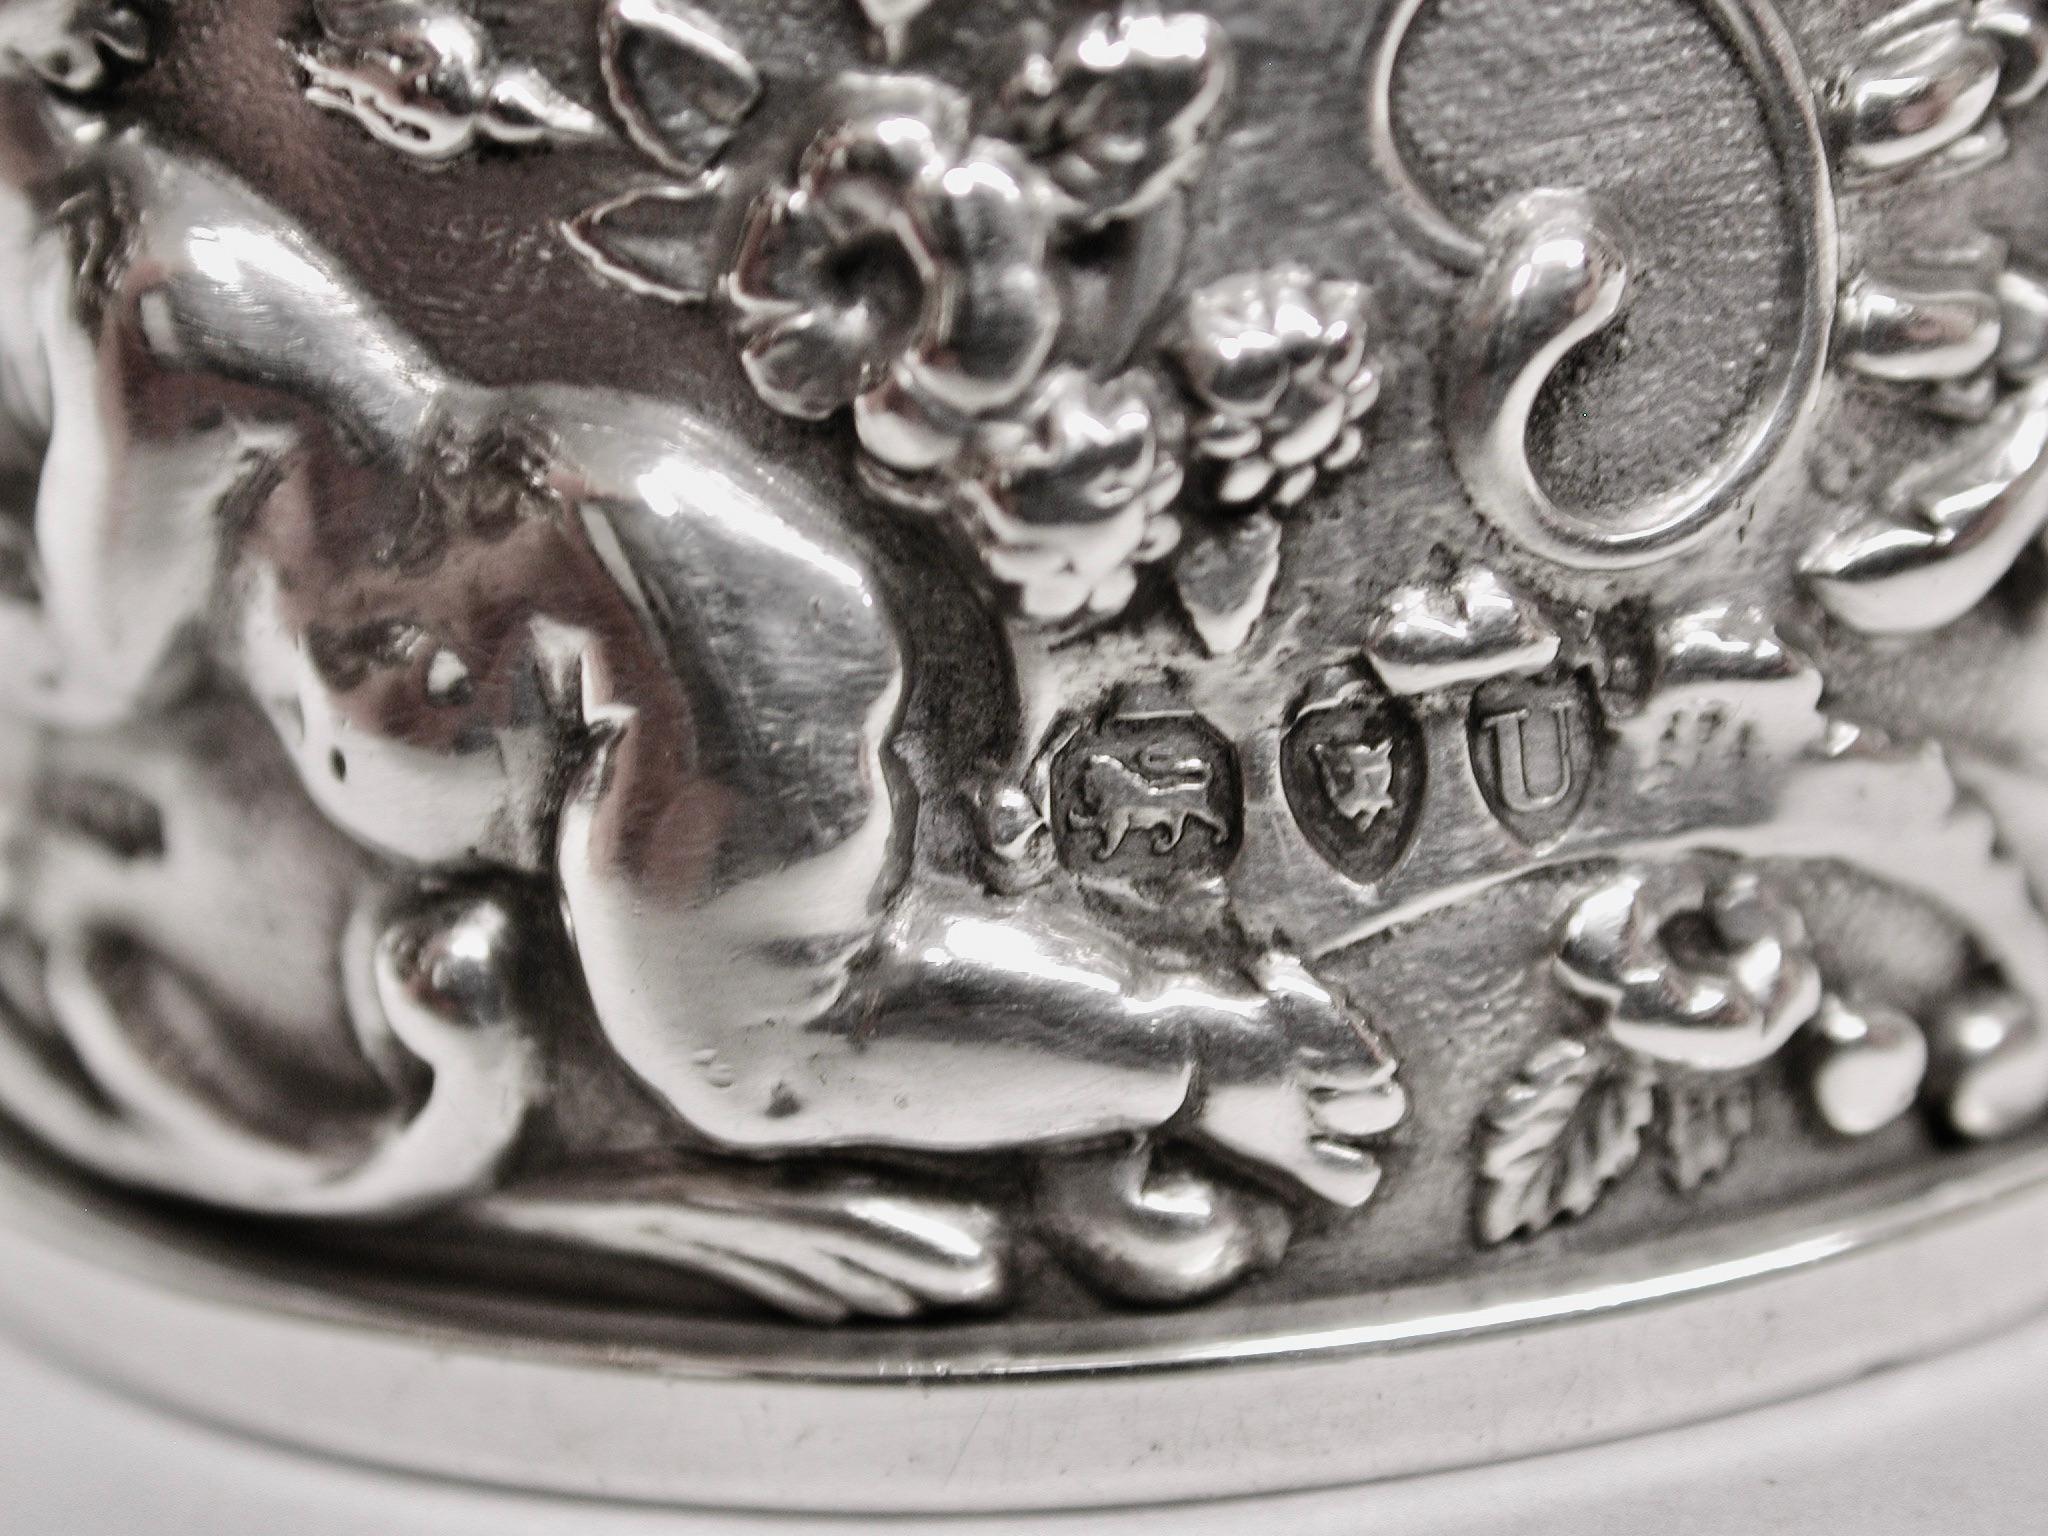 Pair of Victorian Embossed silver napkin rings, dated 1895, William Richard Corke
Assayed in London, decorated with beautiful cherubs,flowers and various scrolls.